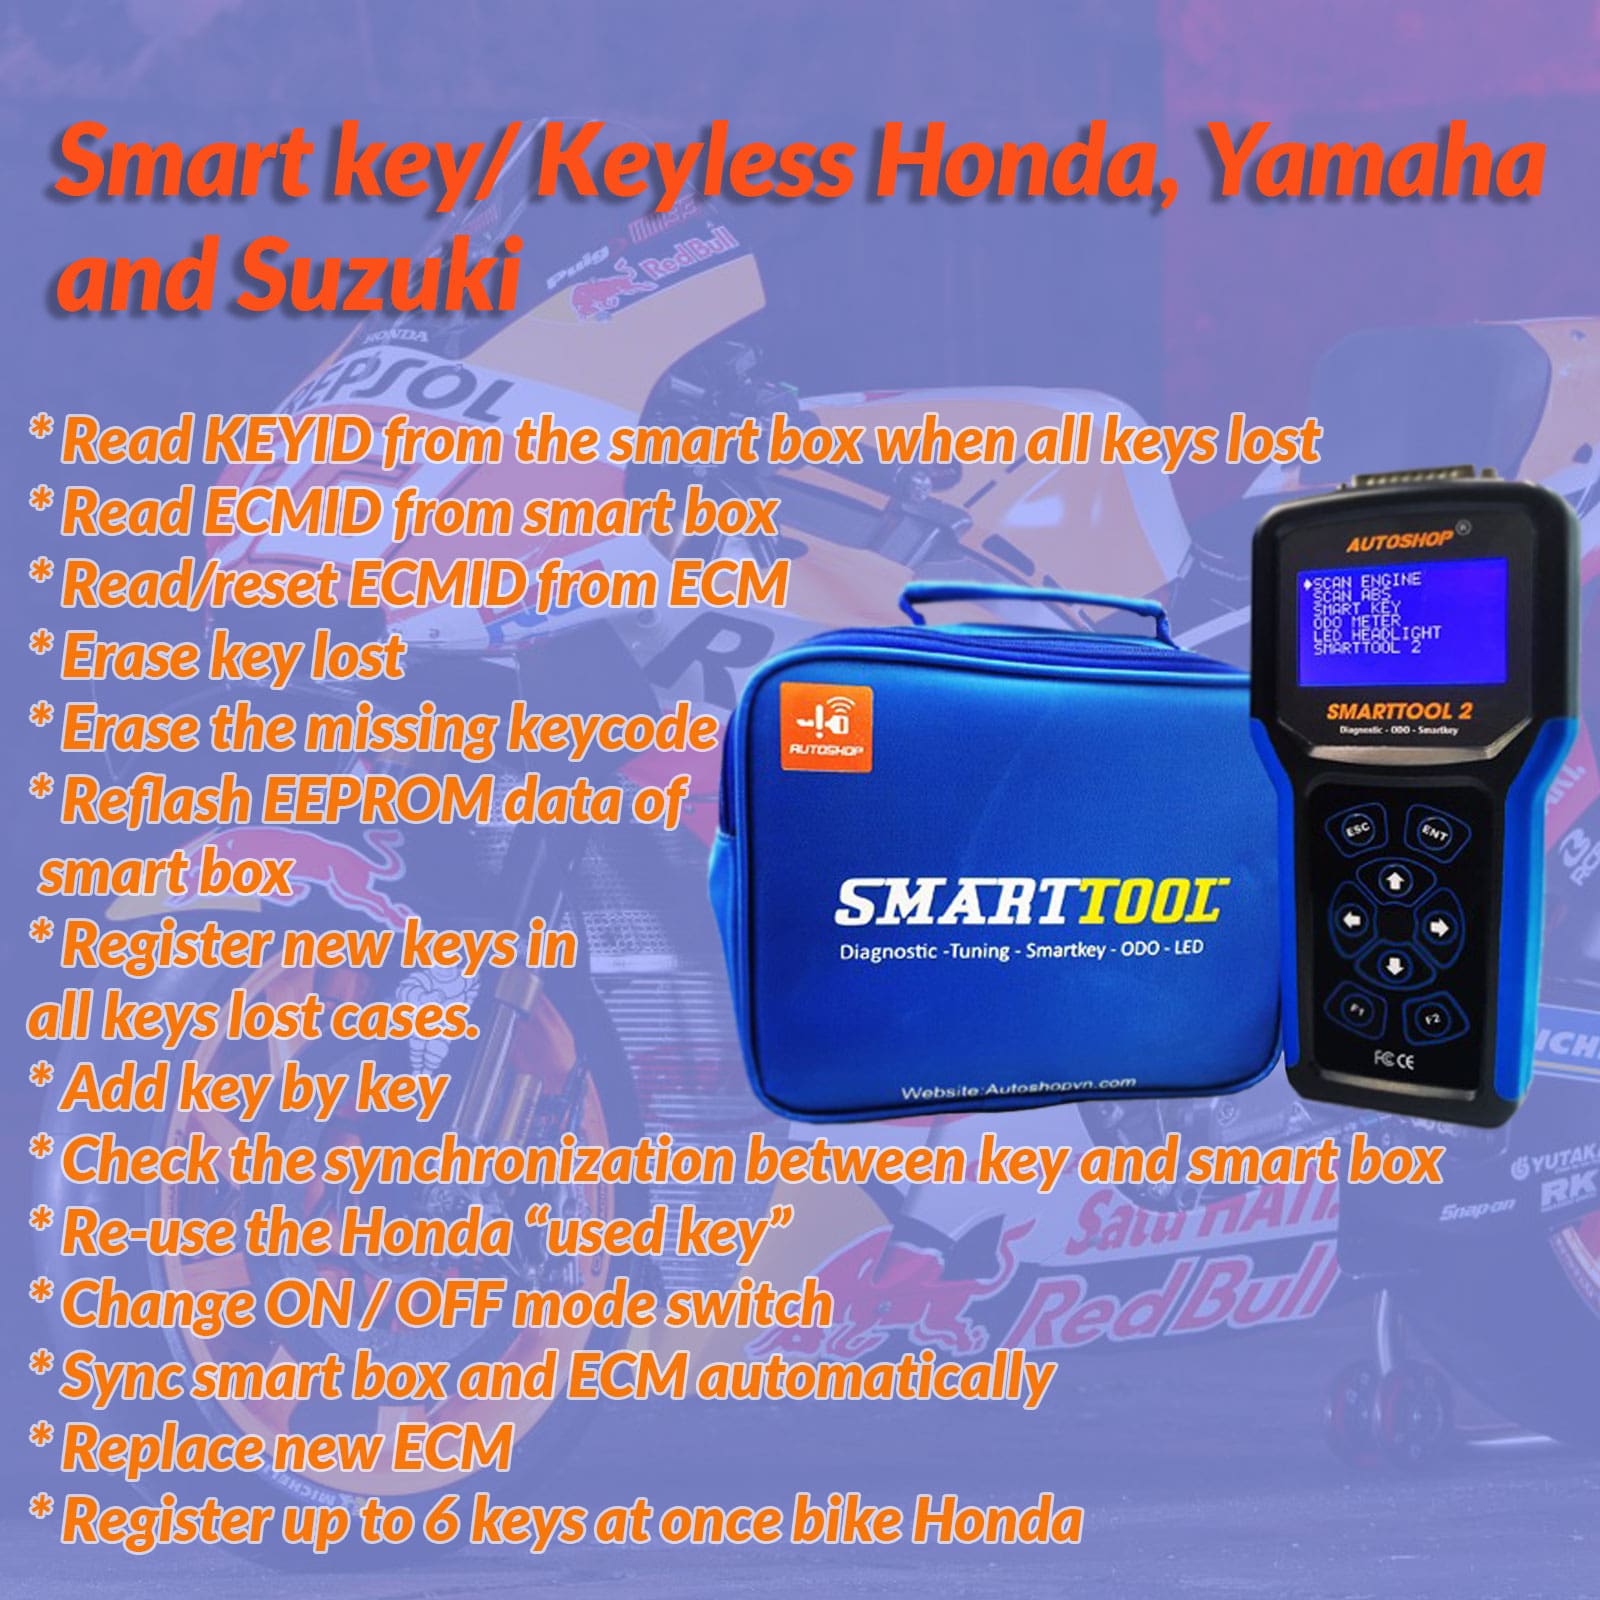 SMARTTOOL2 - Tuning, Remap, Diagnostic, Programming Smartkey and ODO